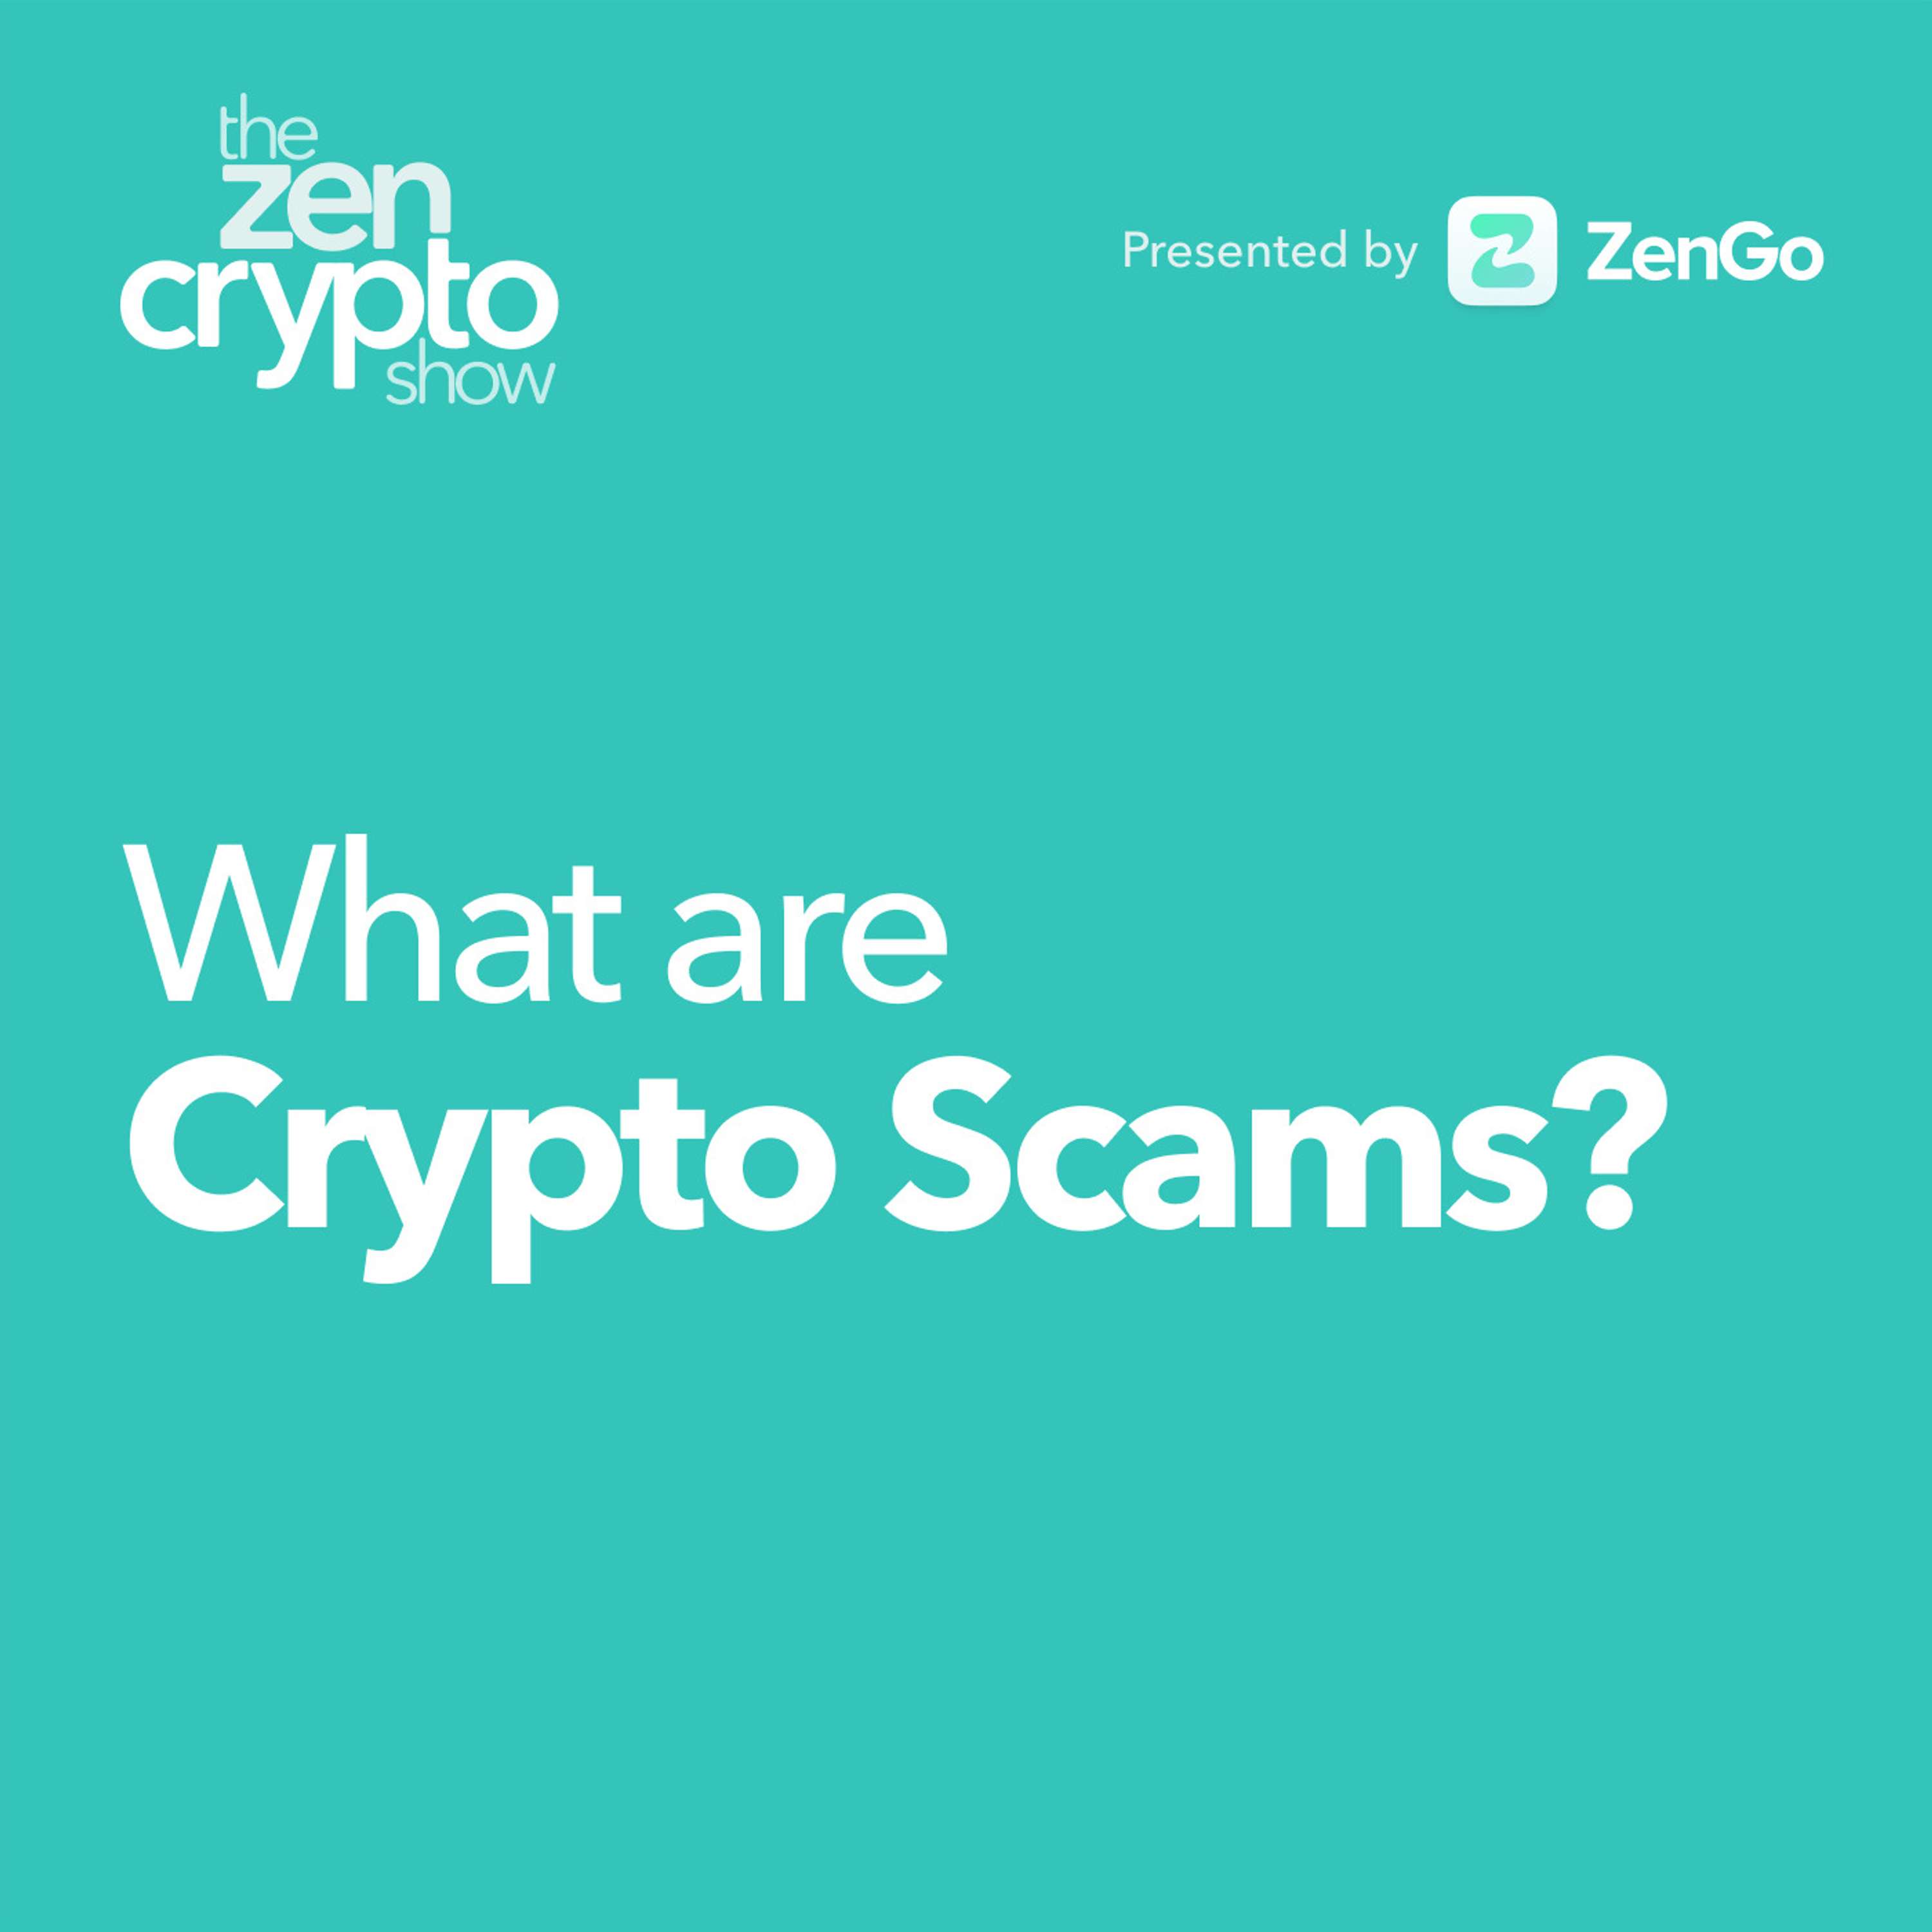 What are crypto scams?